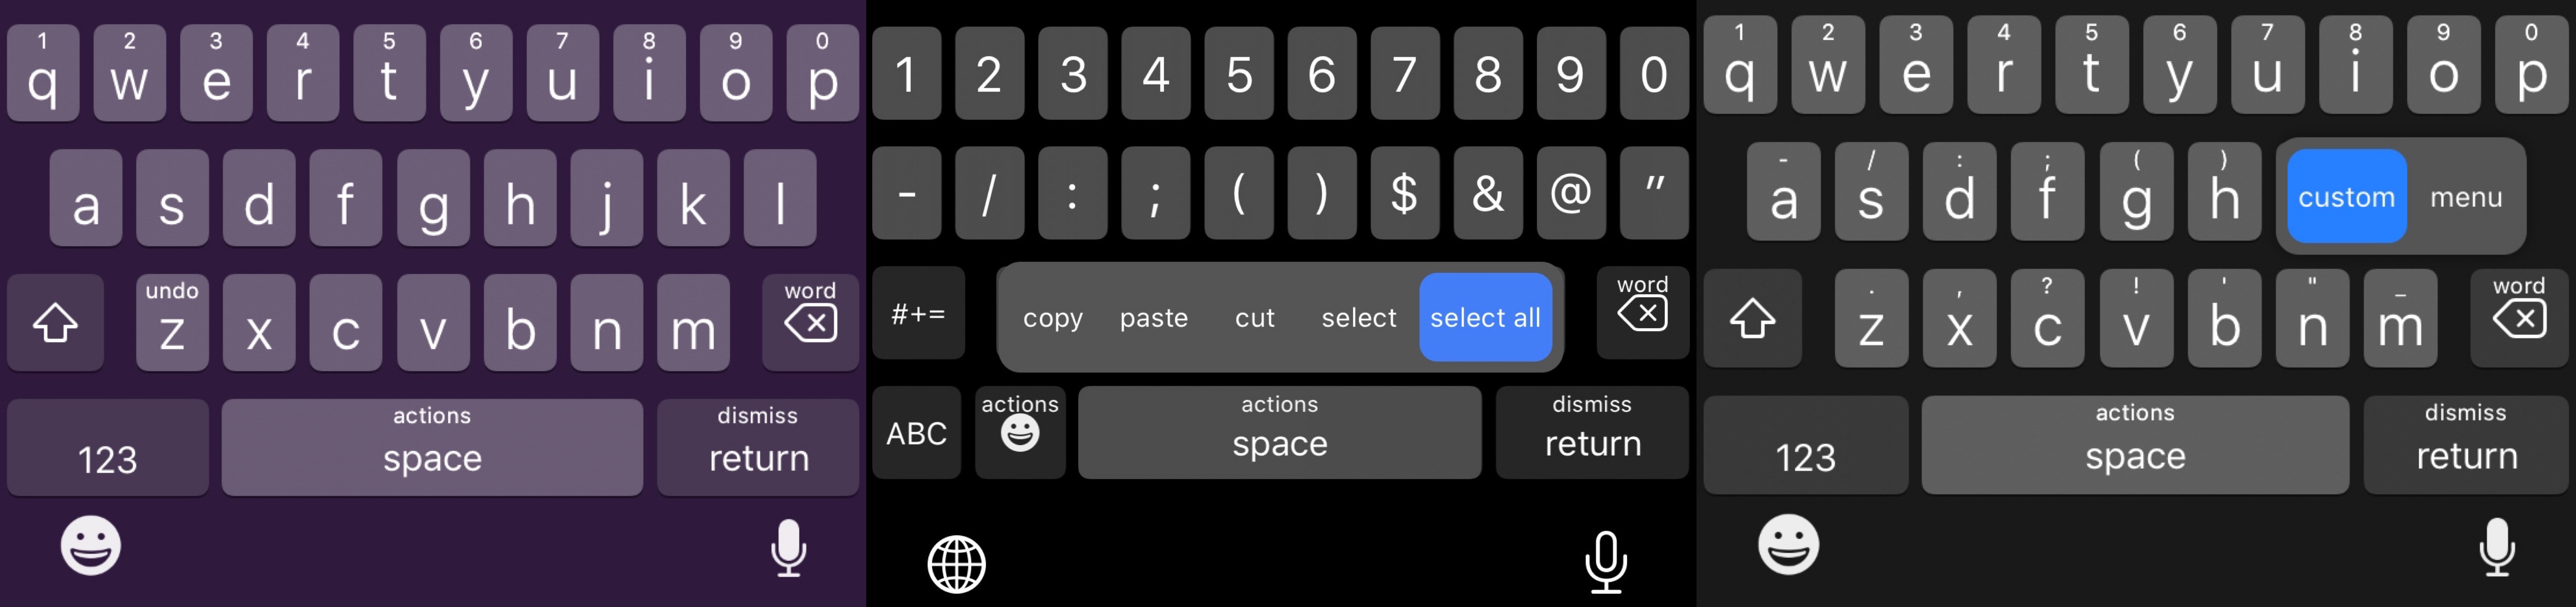 Swipe from any key on the keyboard to invoke assigned actions with SwipeExtenderX.